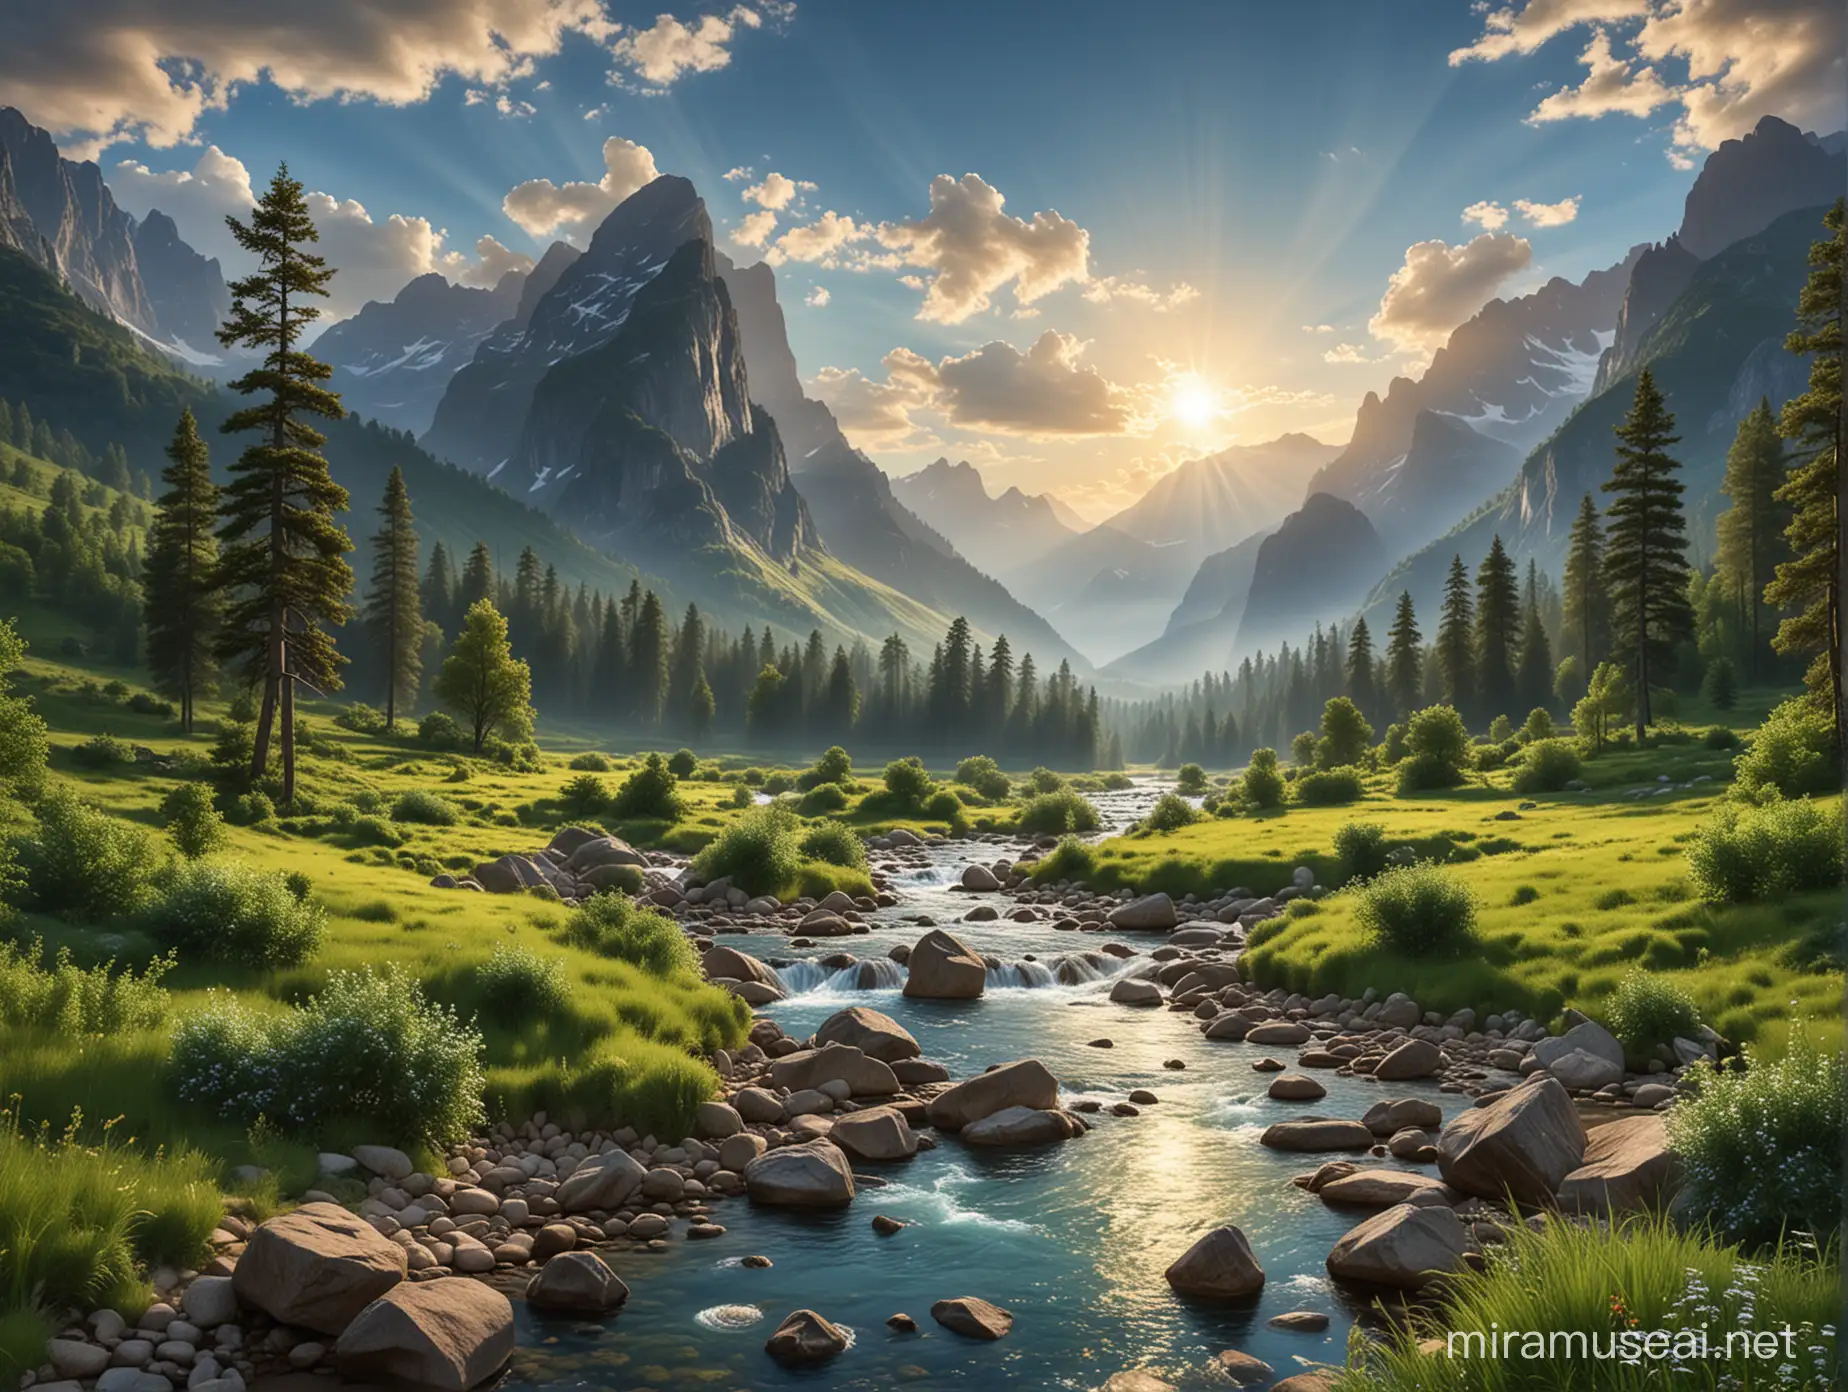 Serene Valley Landscape with Majestic Mountains and Blue Sky